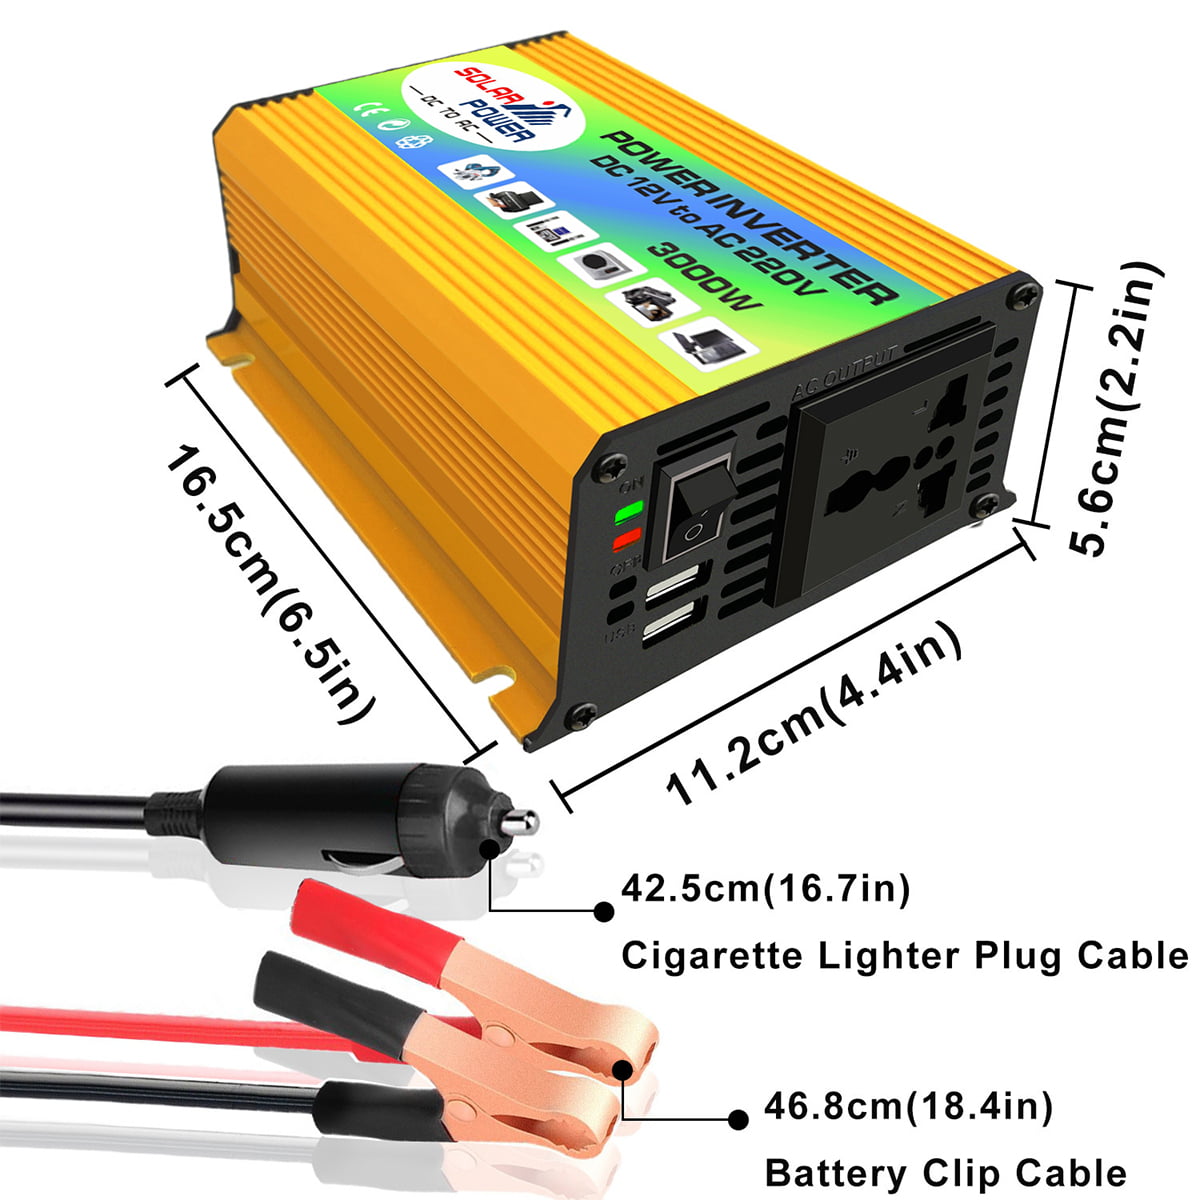 2000W/3000W Car Power Inverter DC 12V To AC 110V Charger Converter with USB Port 